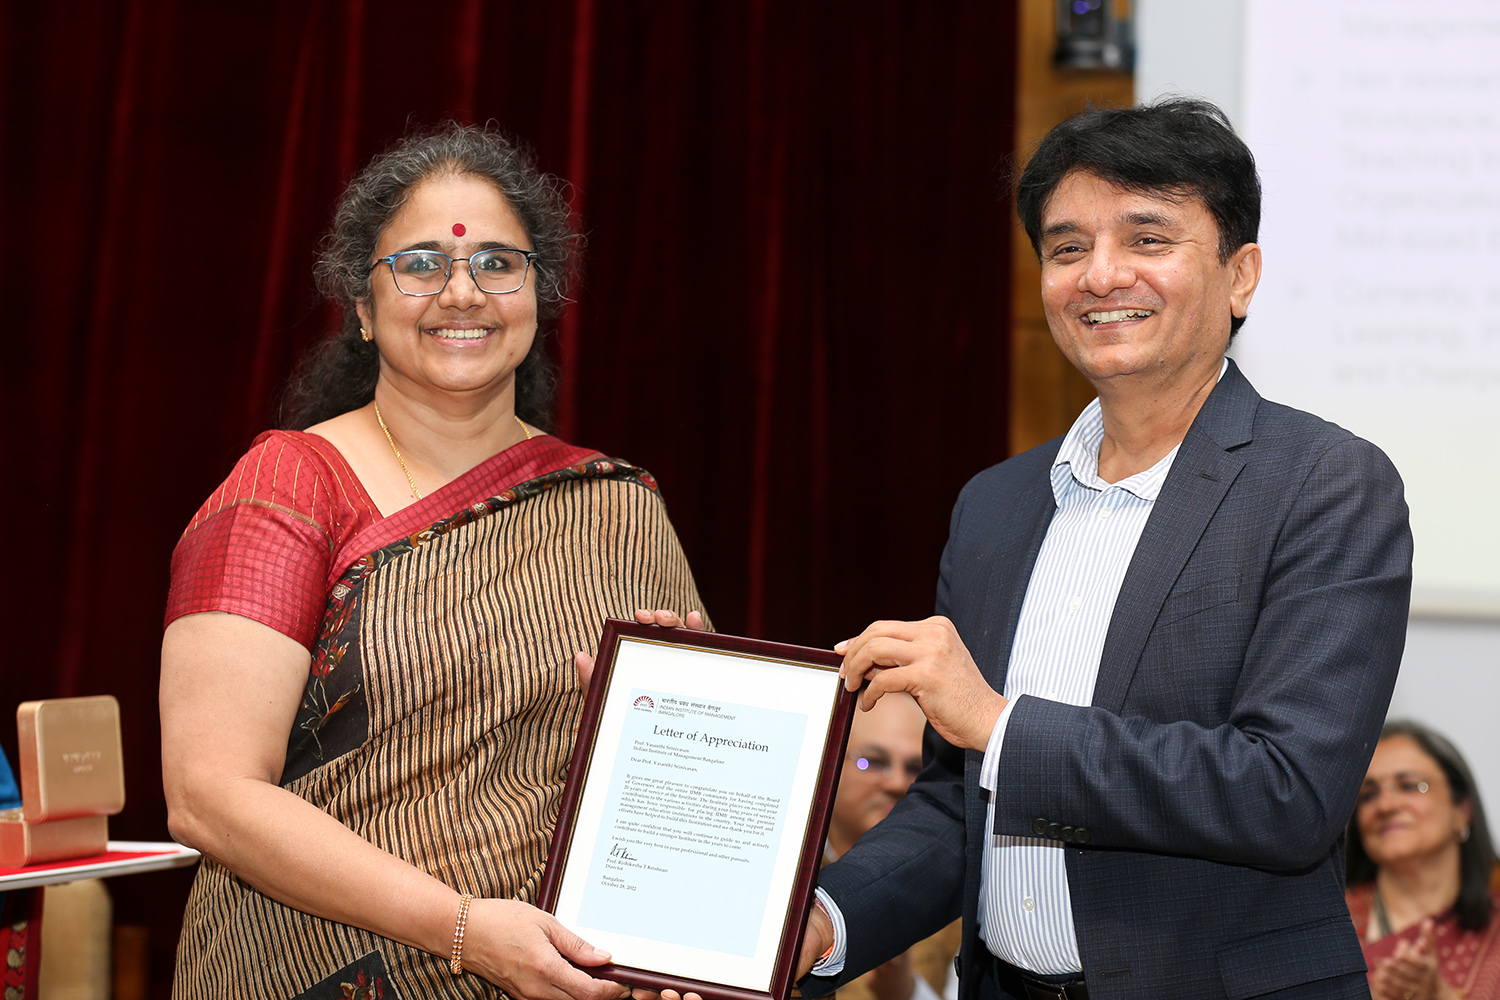 Professor Vasanthi Srinivasan, faculty in the Organizational Behavior &amp; Human Resources Management area, receives the award for 20 years of service from Mr MD Ranganath, Member of the Board of Governors, IIMB, during the institute’s 49th Foundation Day celebrations.